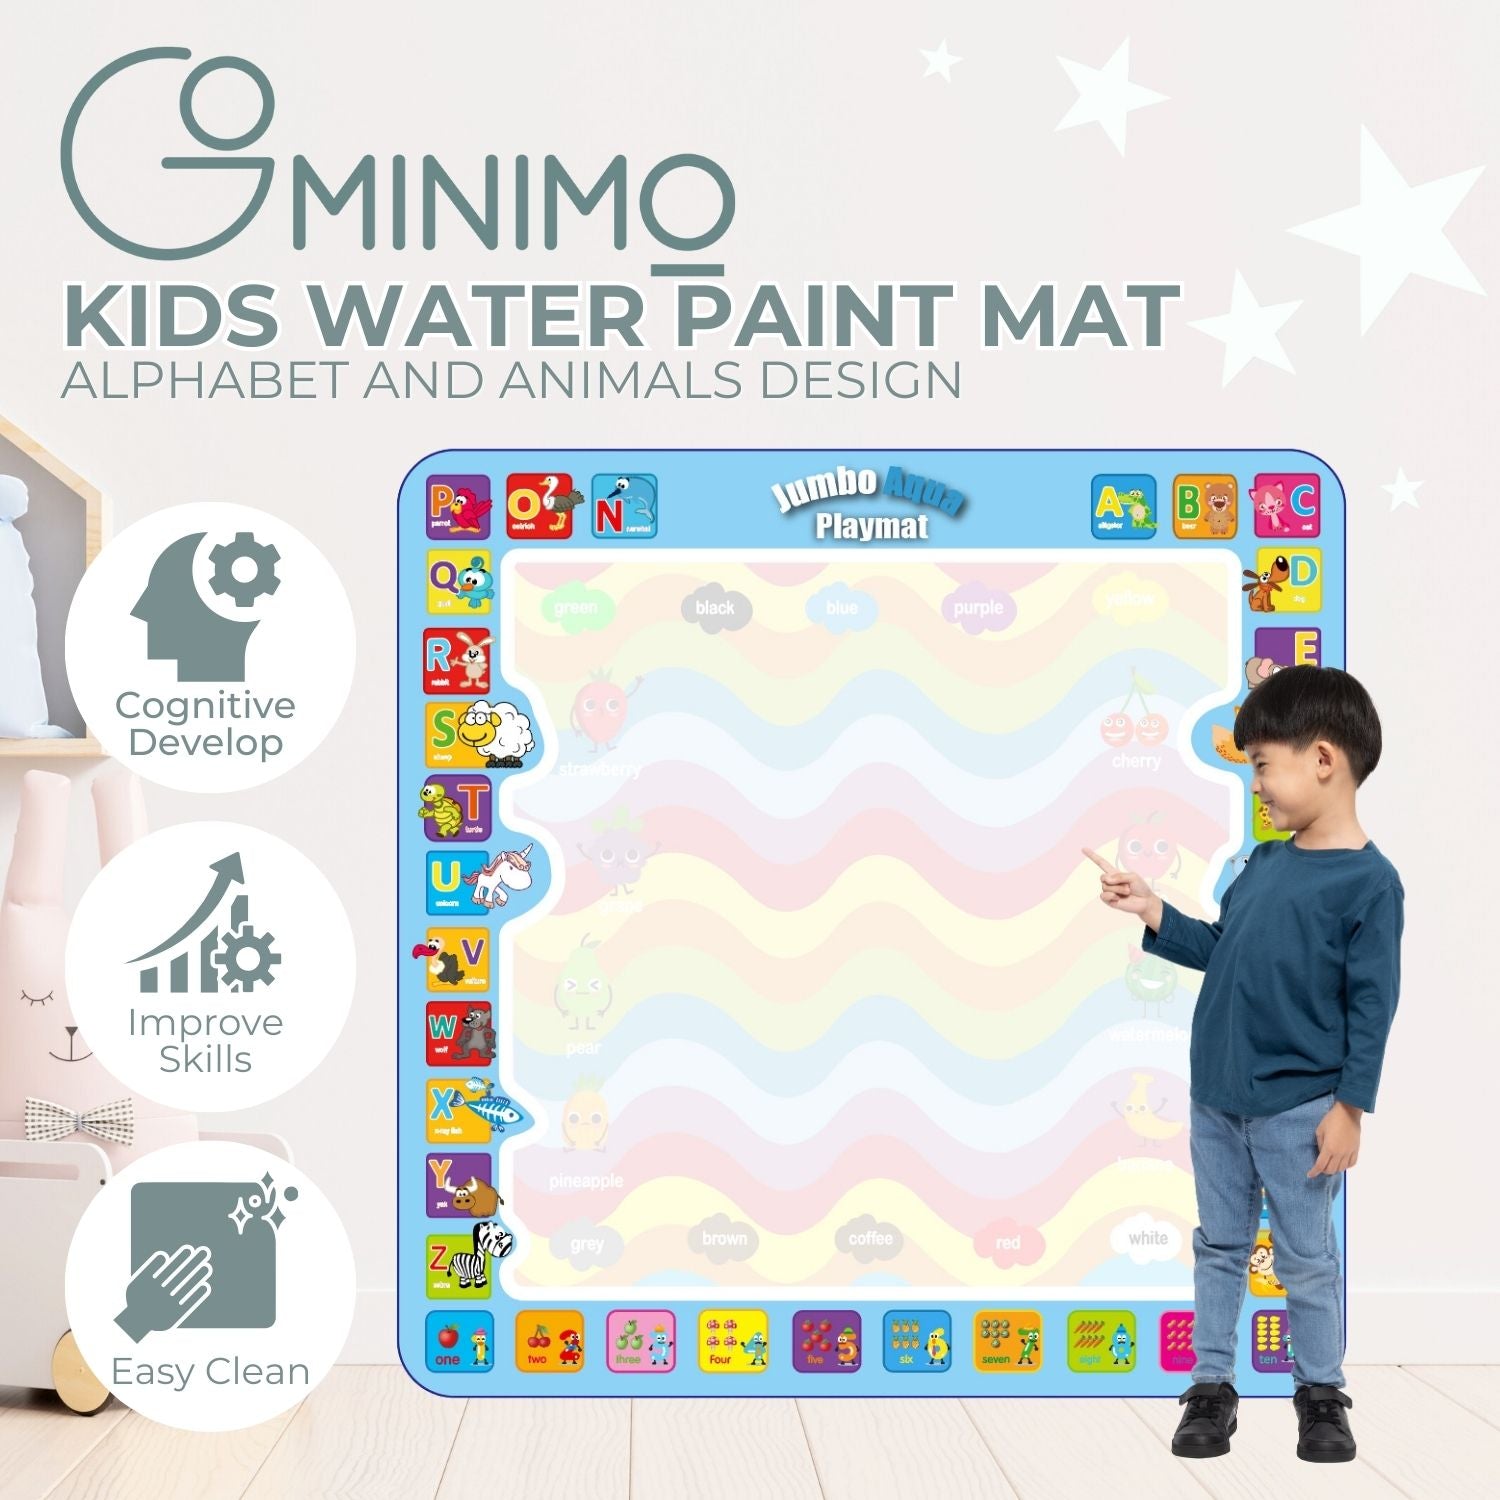 GOMINIMO Kids Water Paint Mat with Alphabet and Animals Design (1m x 1m) - 0